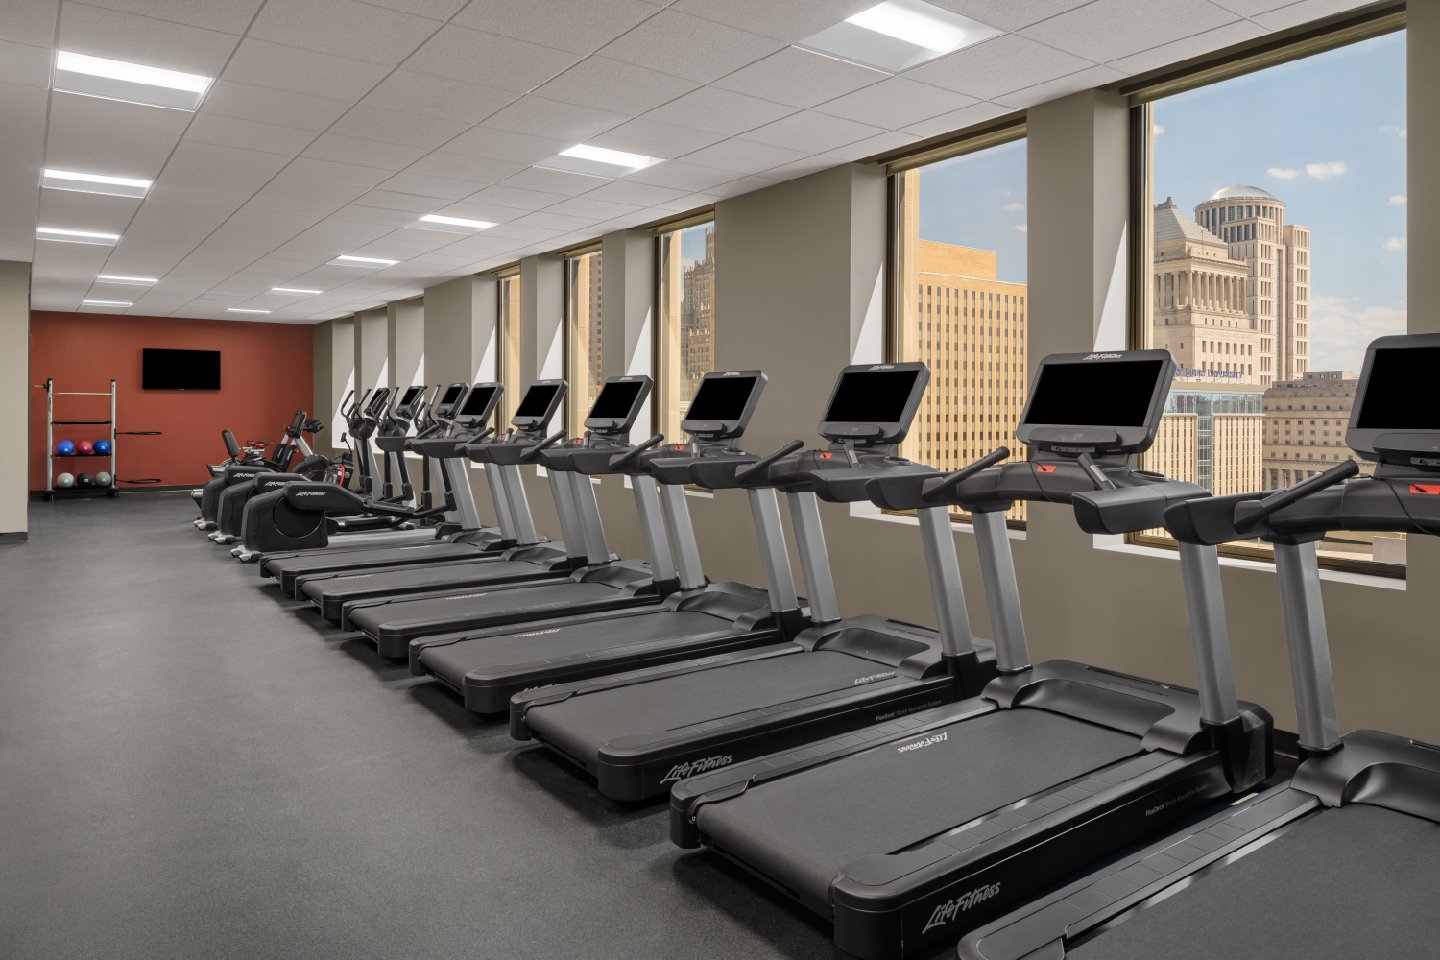 Home2 Suites + Tru Hotel by Hilton | Shell Building Fitness Room